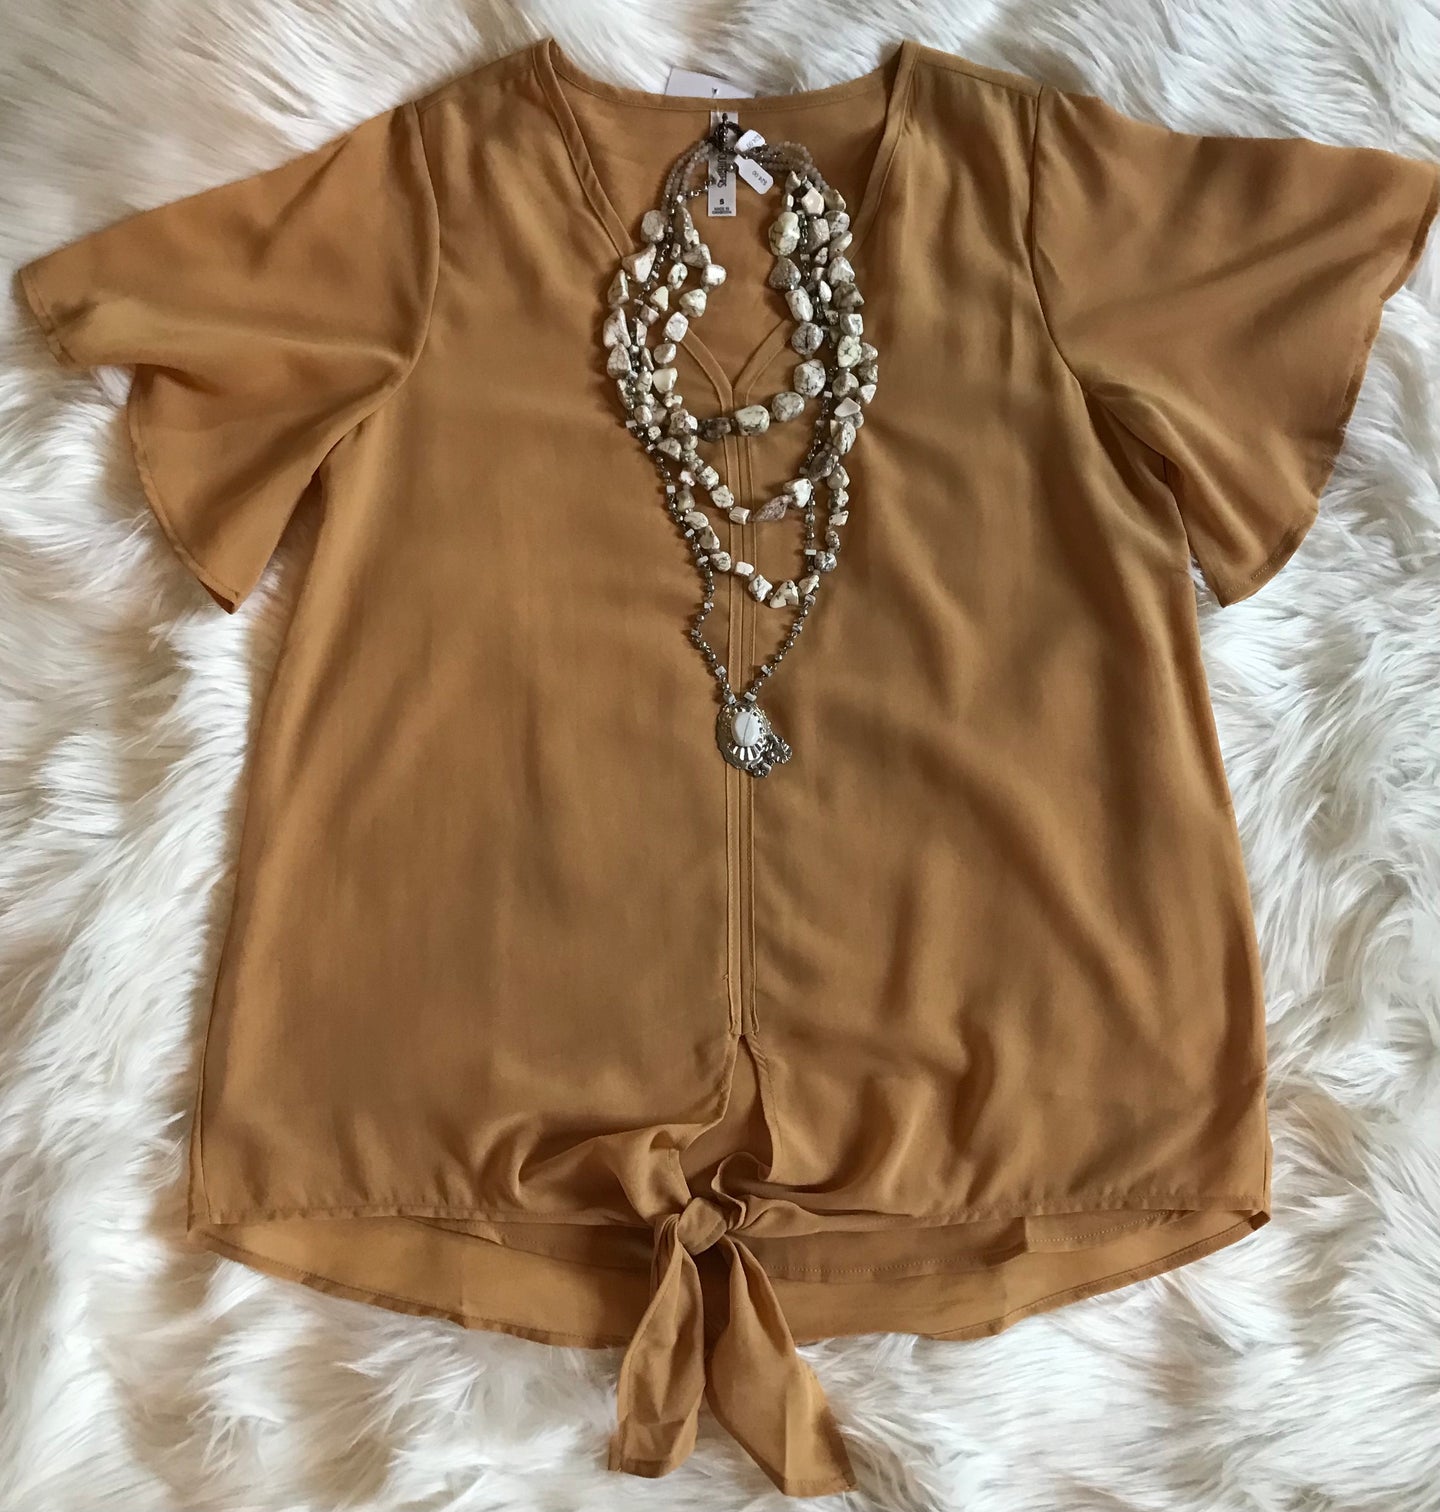 Blouse with tie-knot